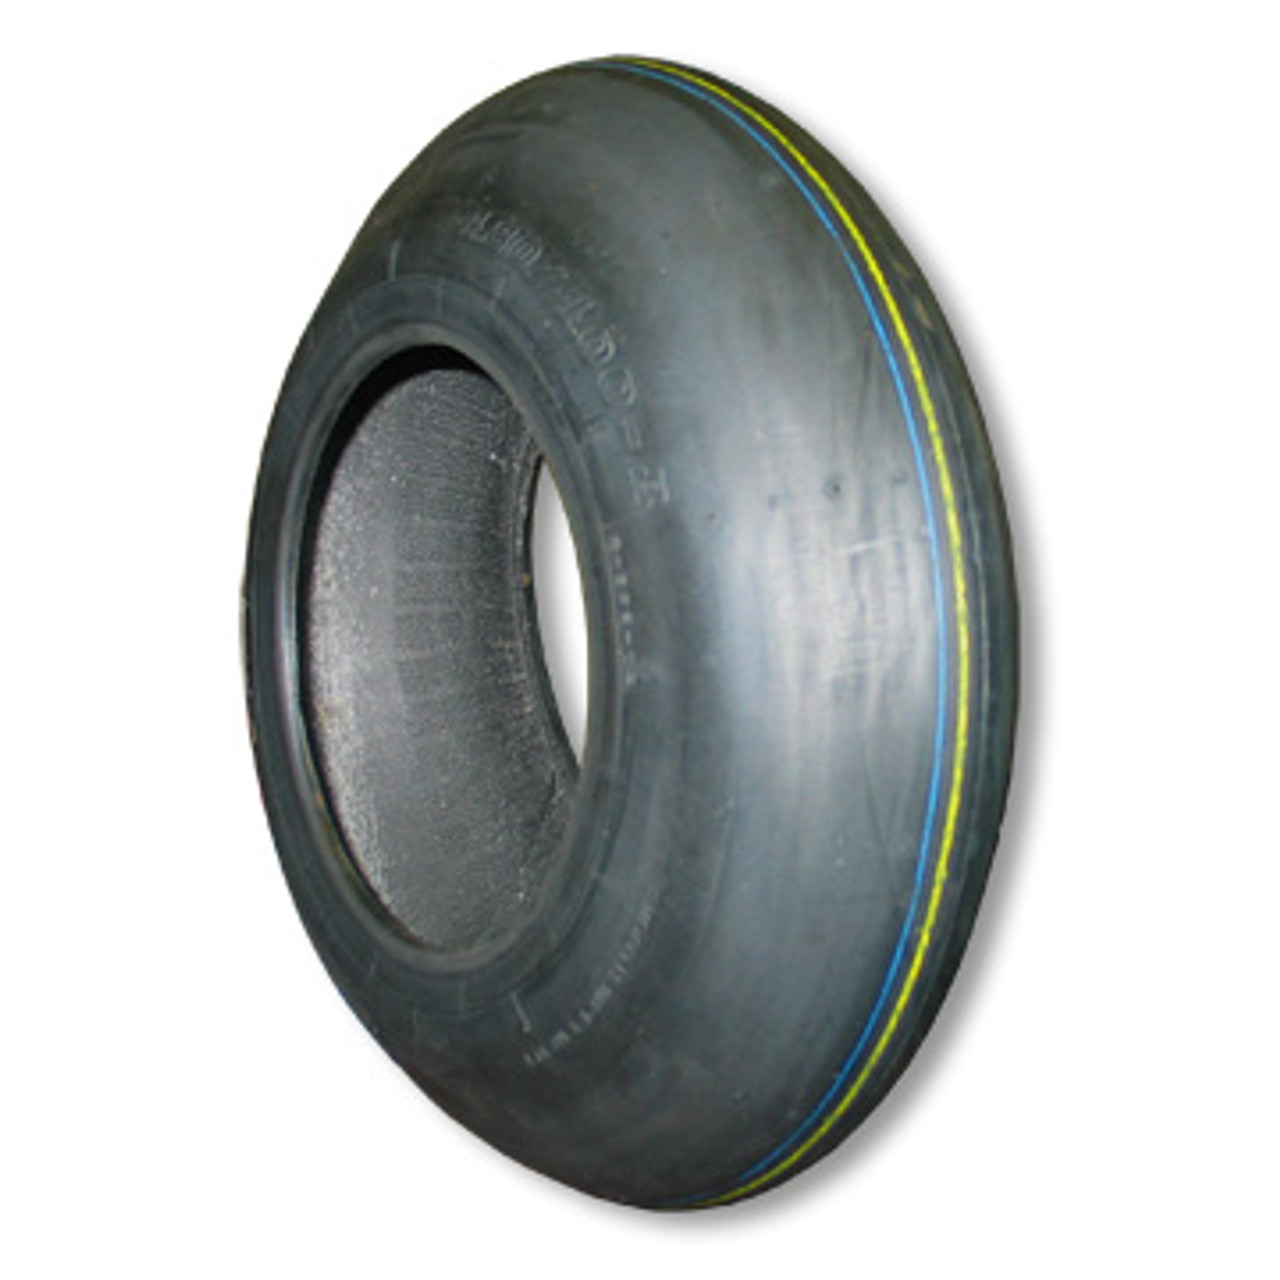 480/400 X 8 Smooth Tire, 2 Ply, 4.6" Wide, 16.3" OD